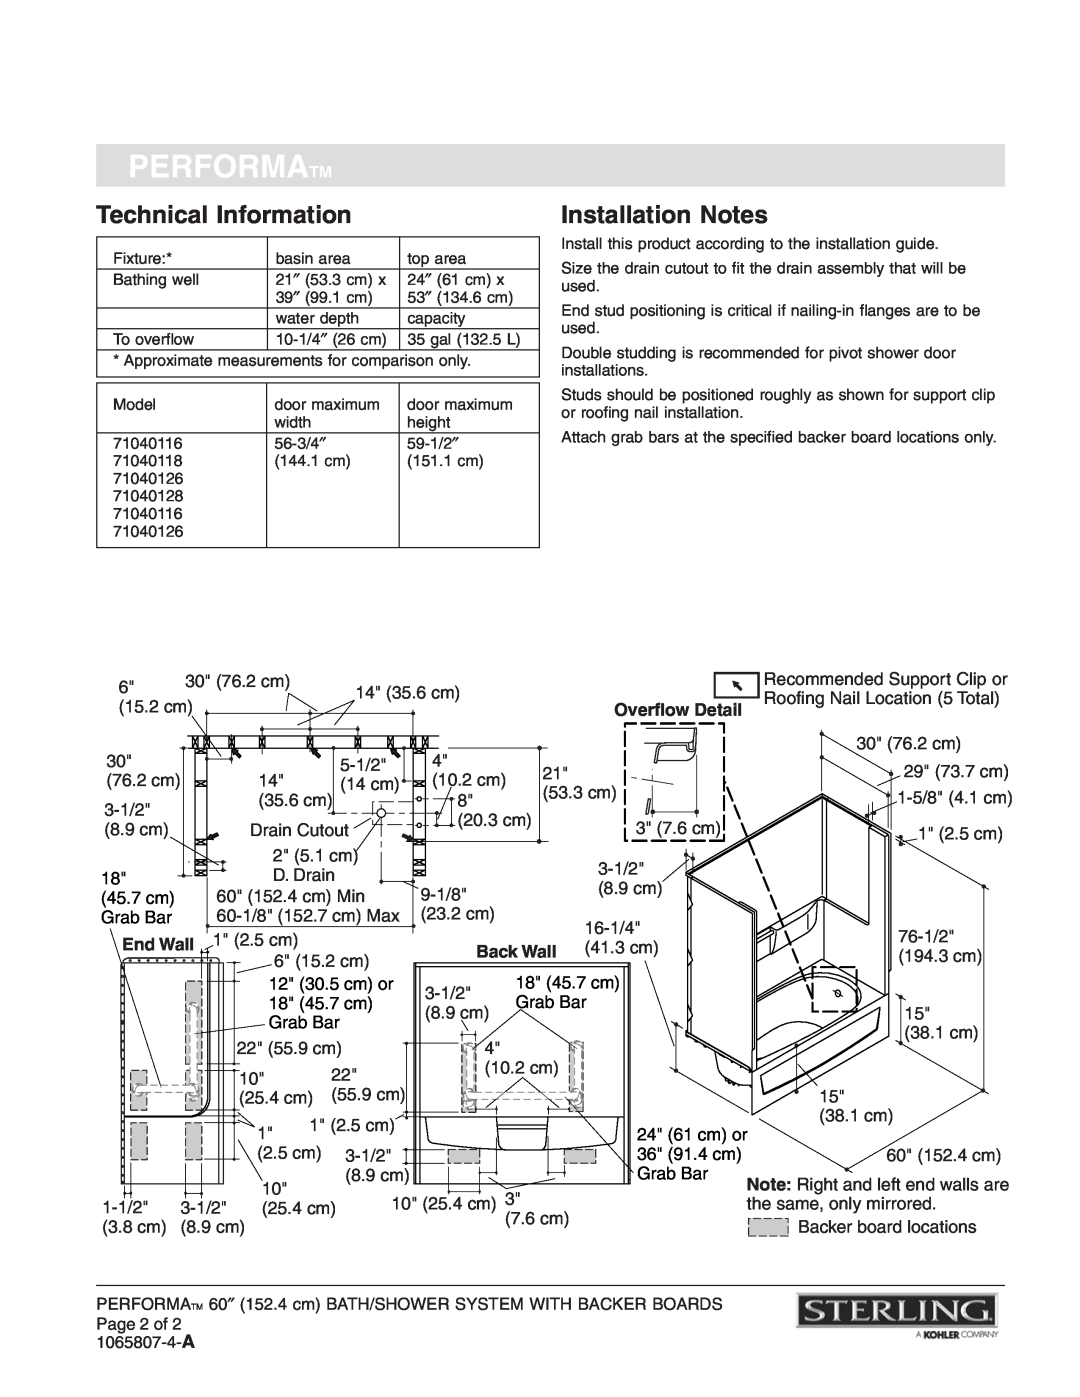 Sterling Plumbing 71044106, 71040128 Technical Information, Installation Notes, Performatm, Overflow Detail, End Wall 